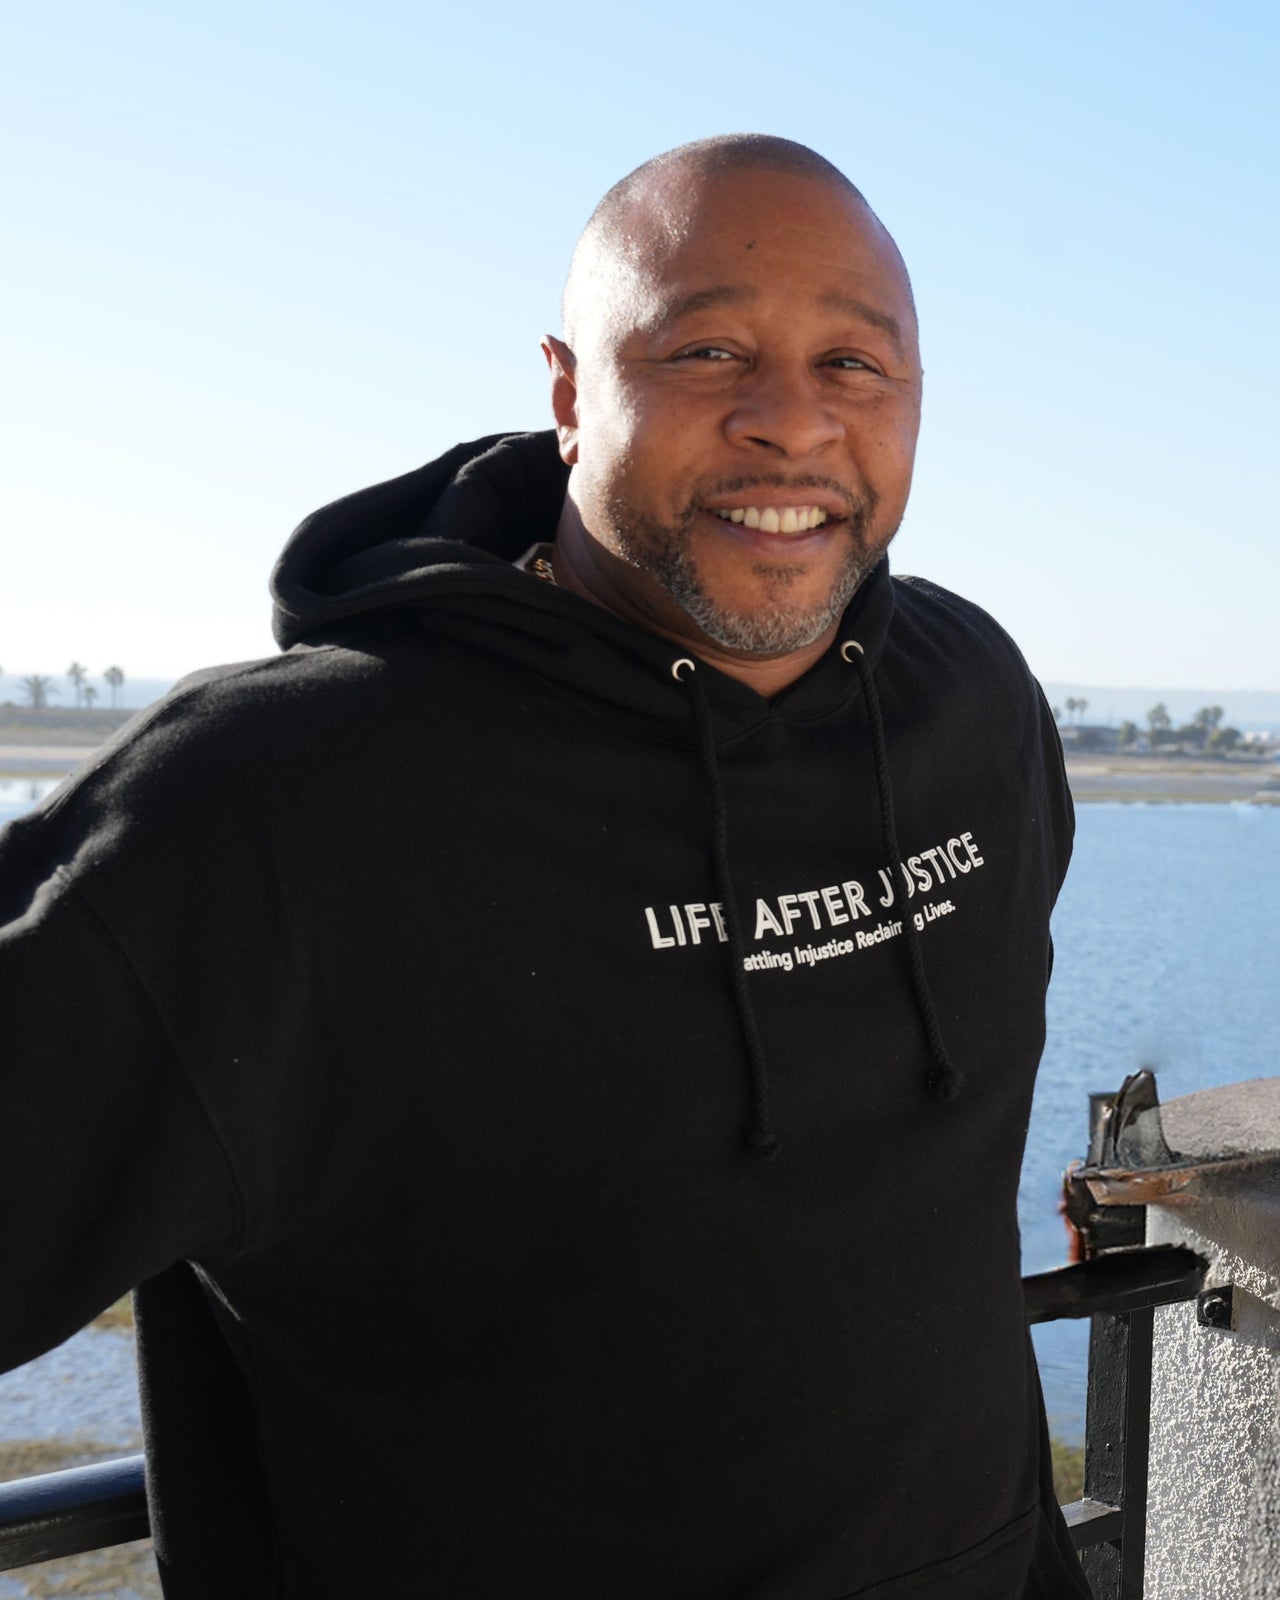 After A Wrongful Conviction, This Black Man Earned A Law Degree ...